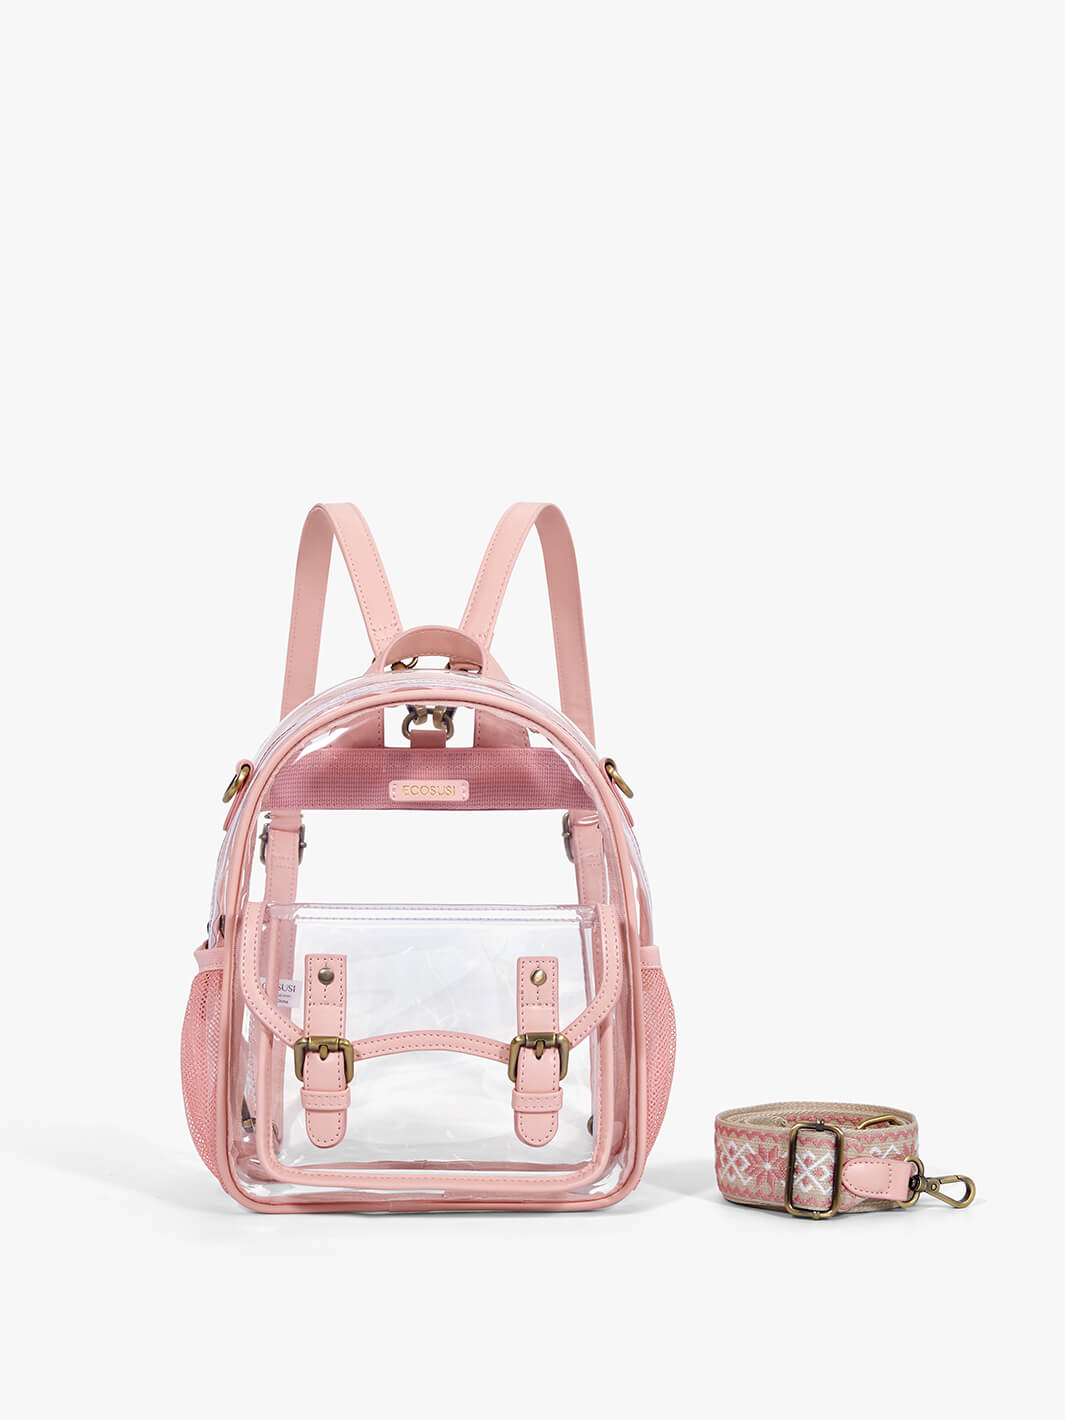 Cute Clear Mini Backpack with waterproof and durable - ECOSUSI Pink Clear Backpack